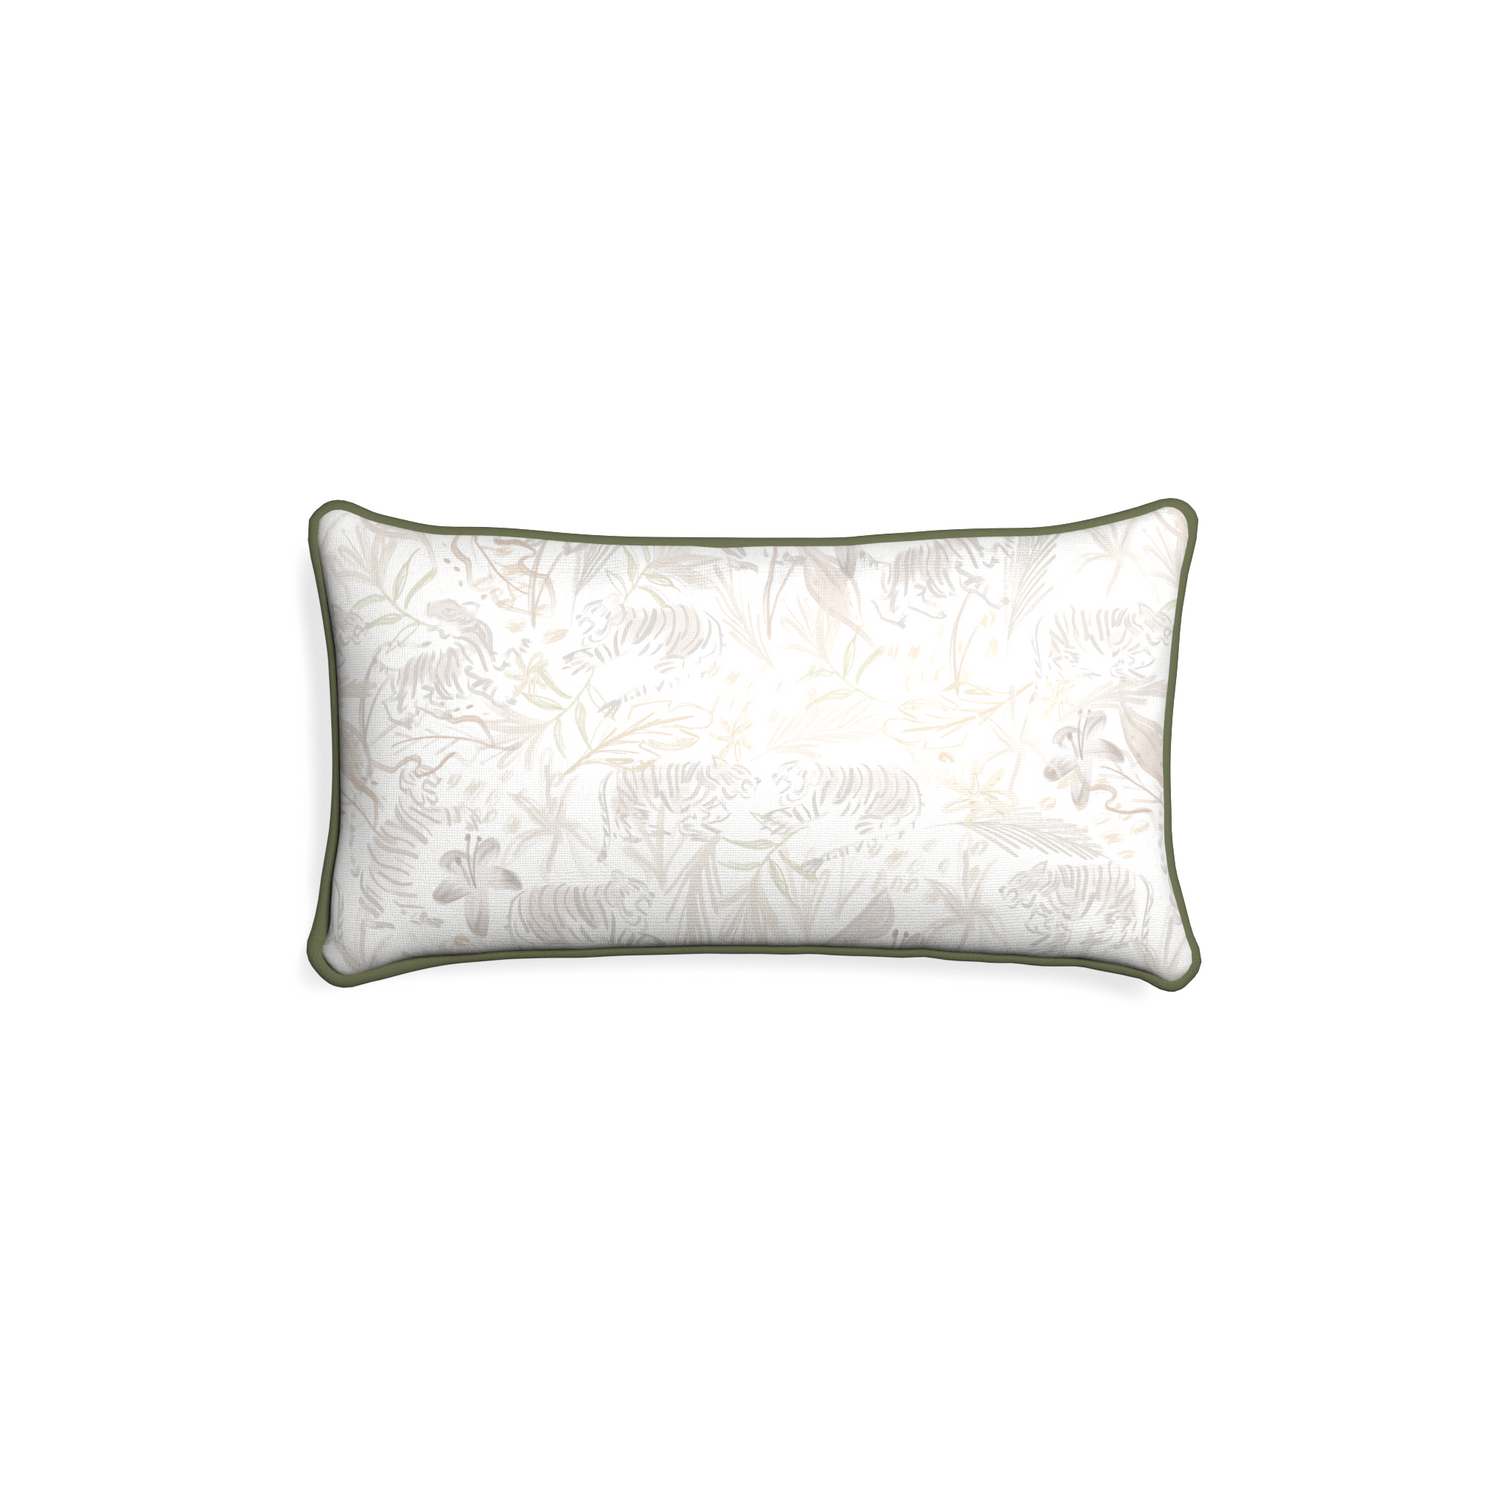 Petite-lumbar frida sand custom beige chinoiserie tigerpillow with f piping on white background